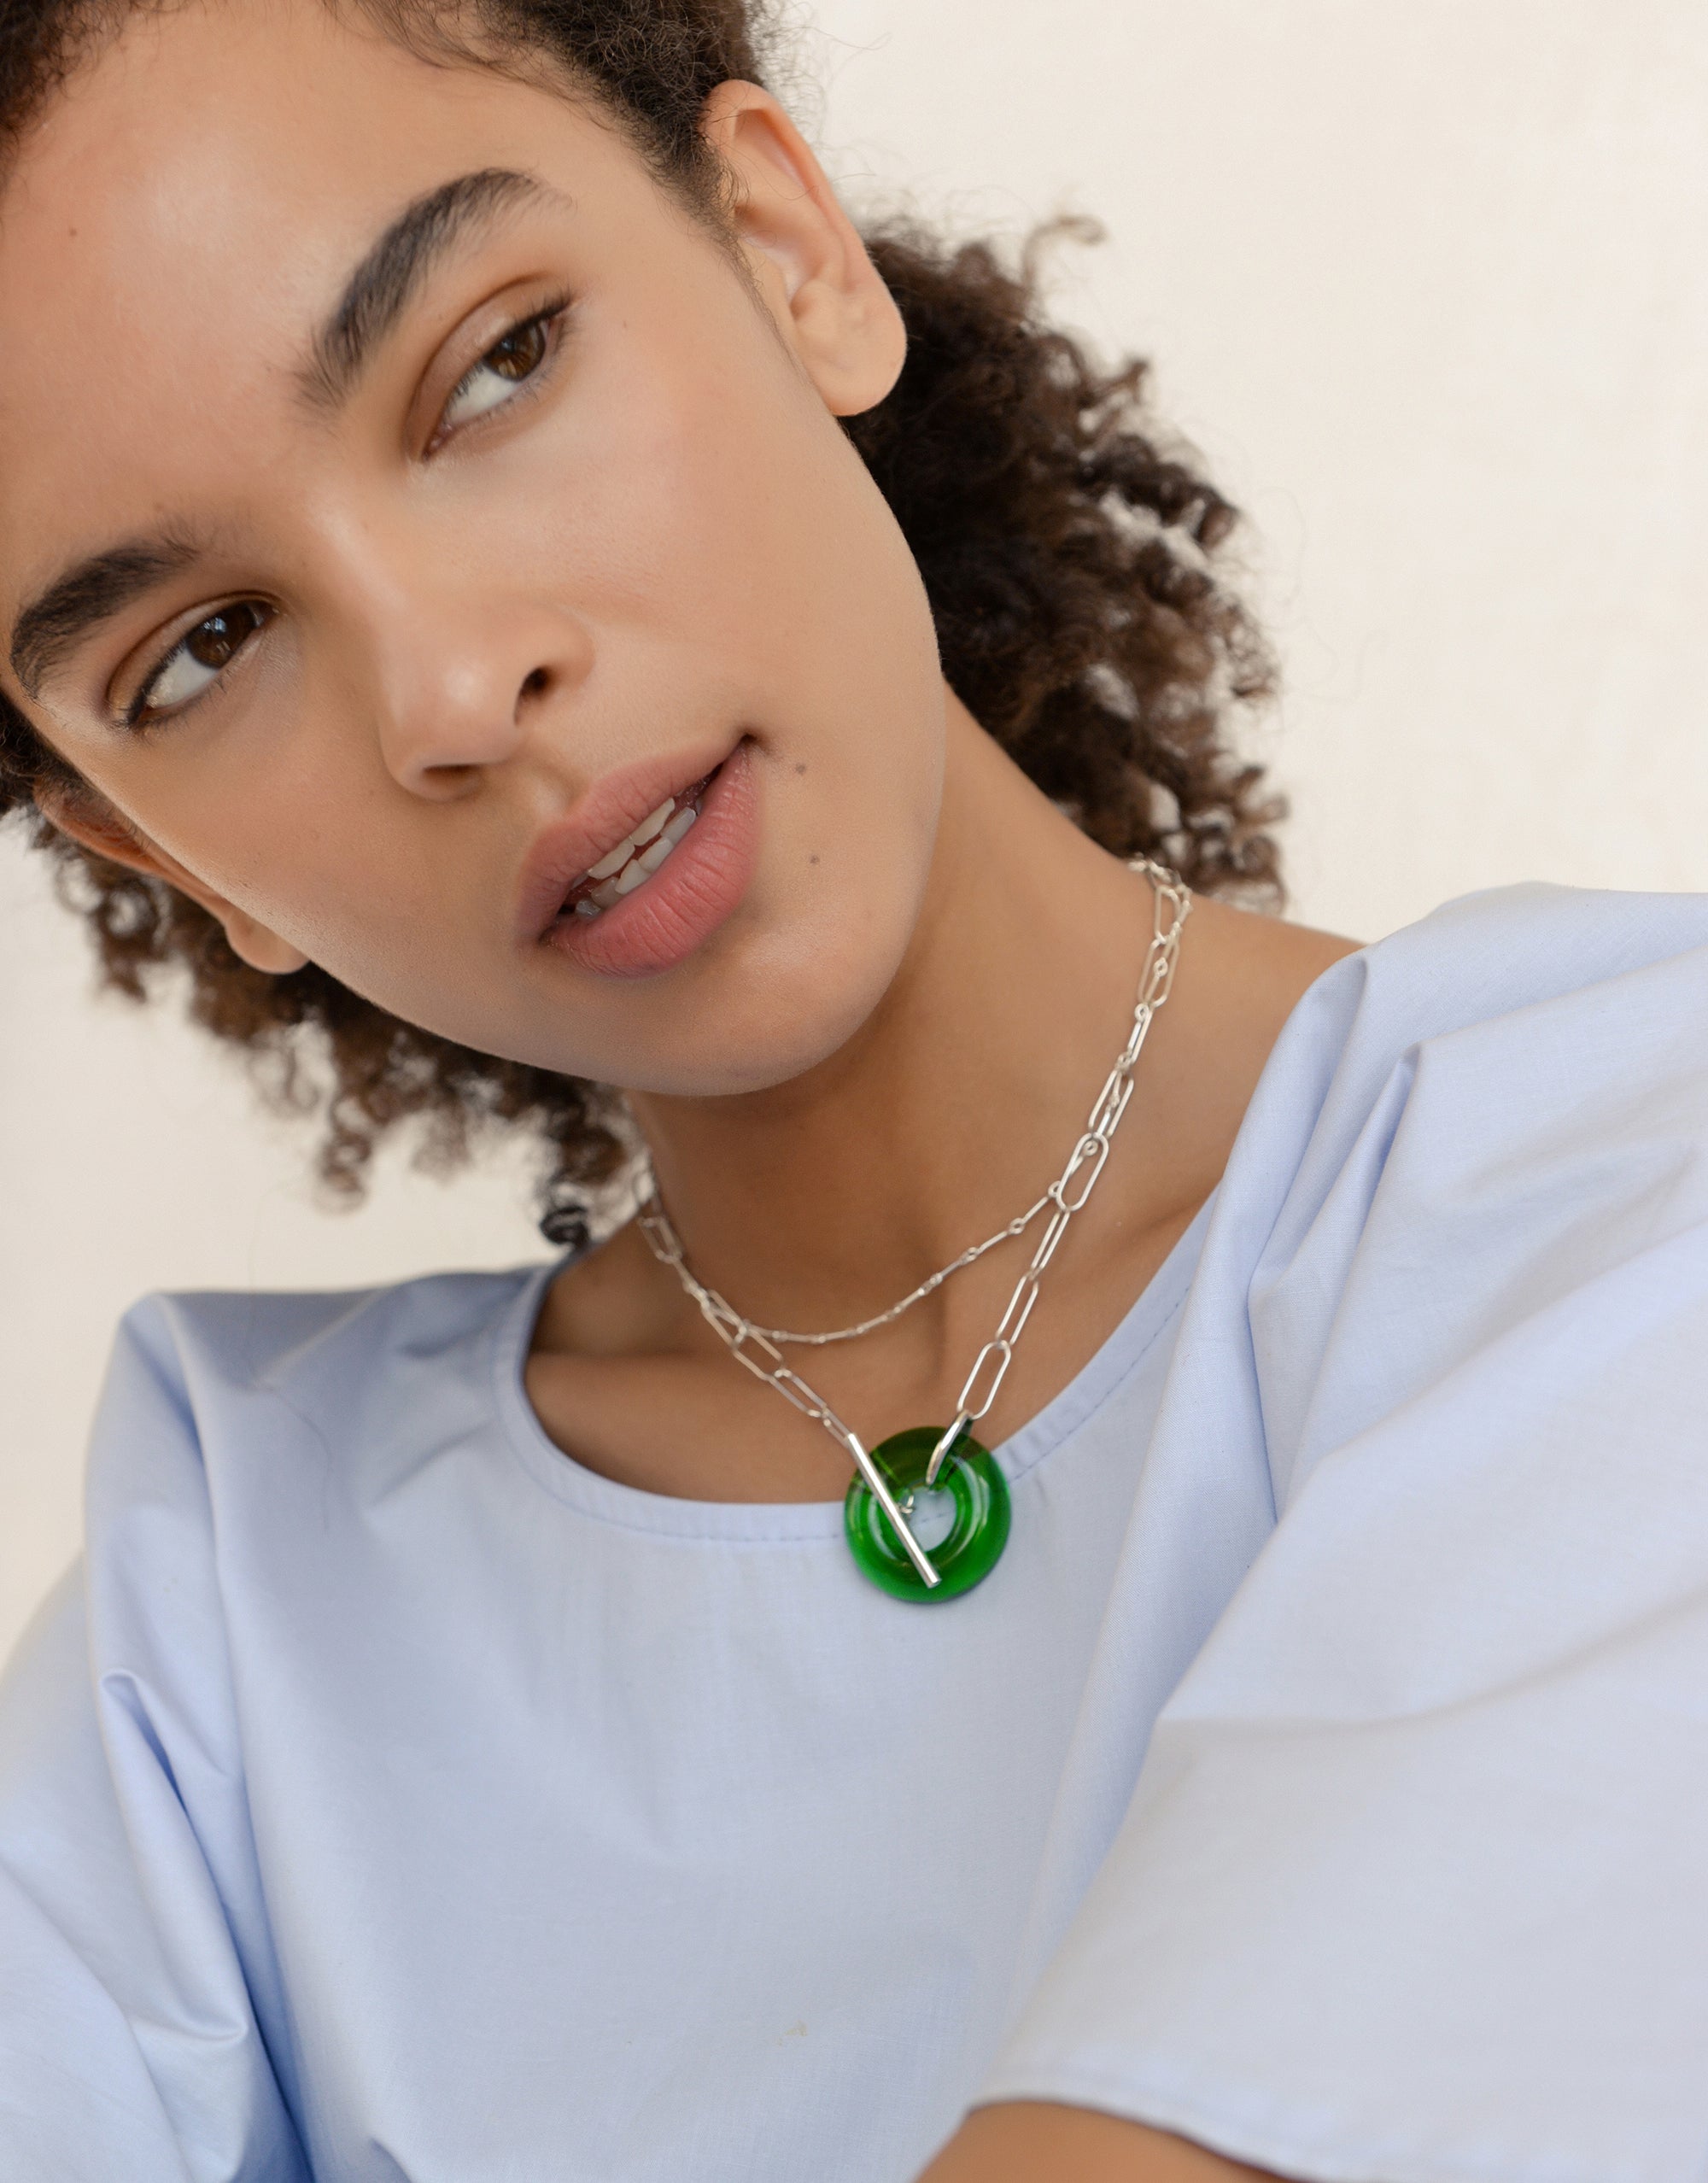 CLED Eco Conscious Sustainable upcycled jewelry made from Eco Gems and sterling silver from recycled glass | The Day Torus Necklace